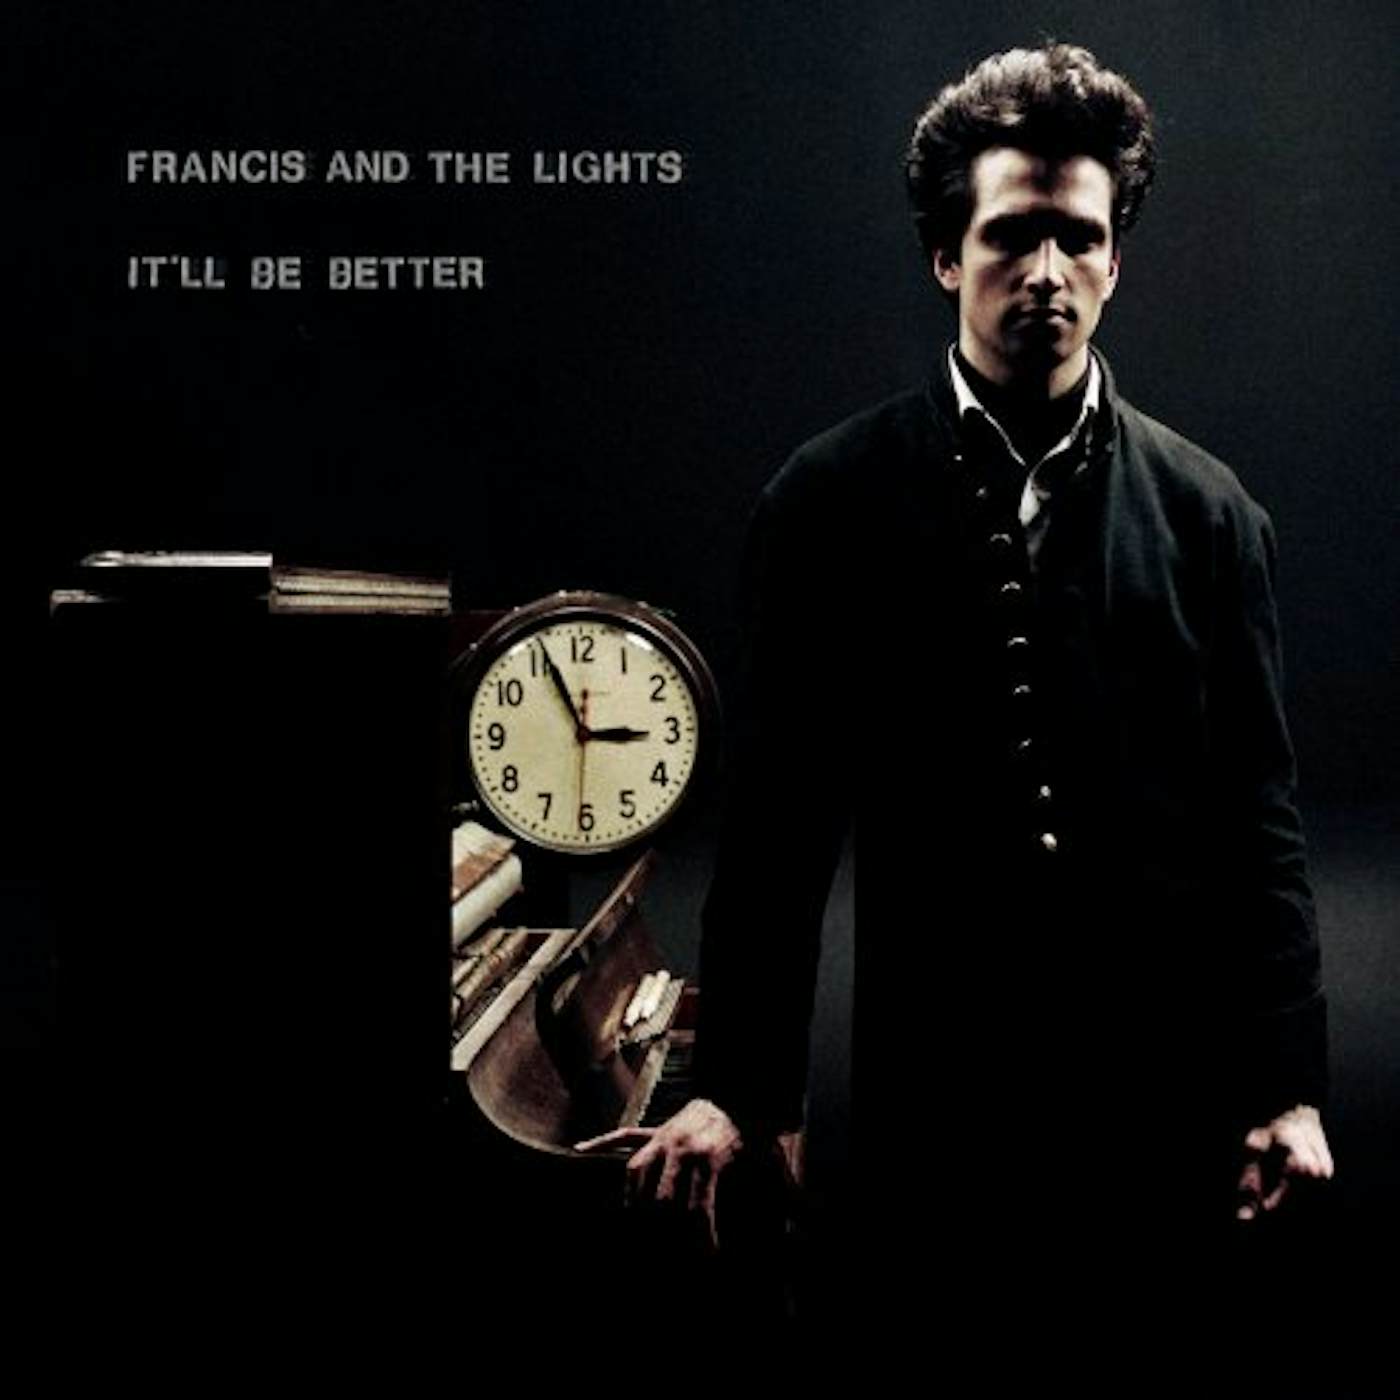 Francis and the Lights IT'LL BE BETTER CD